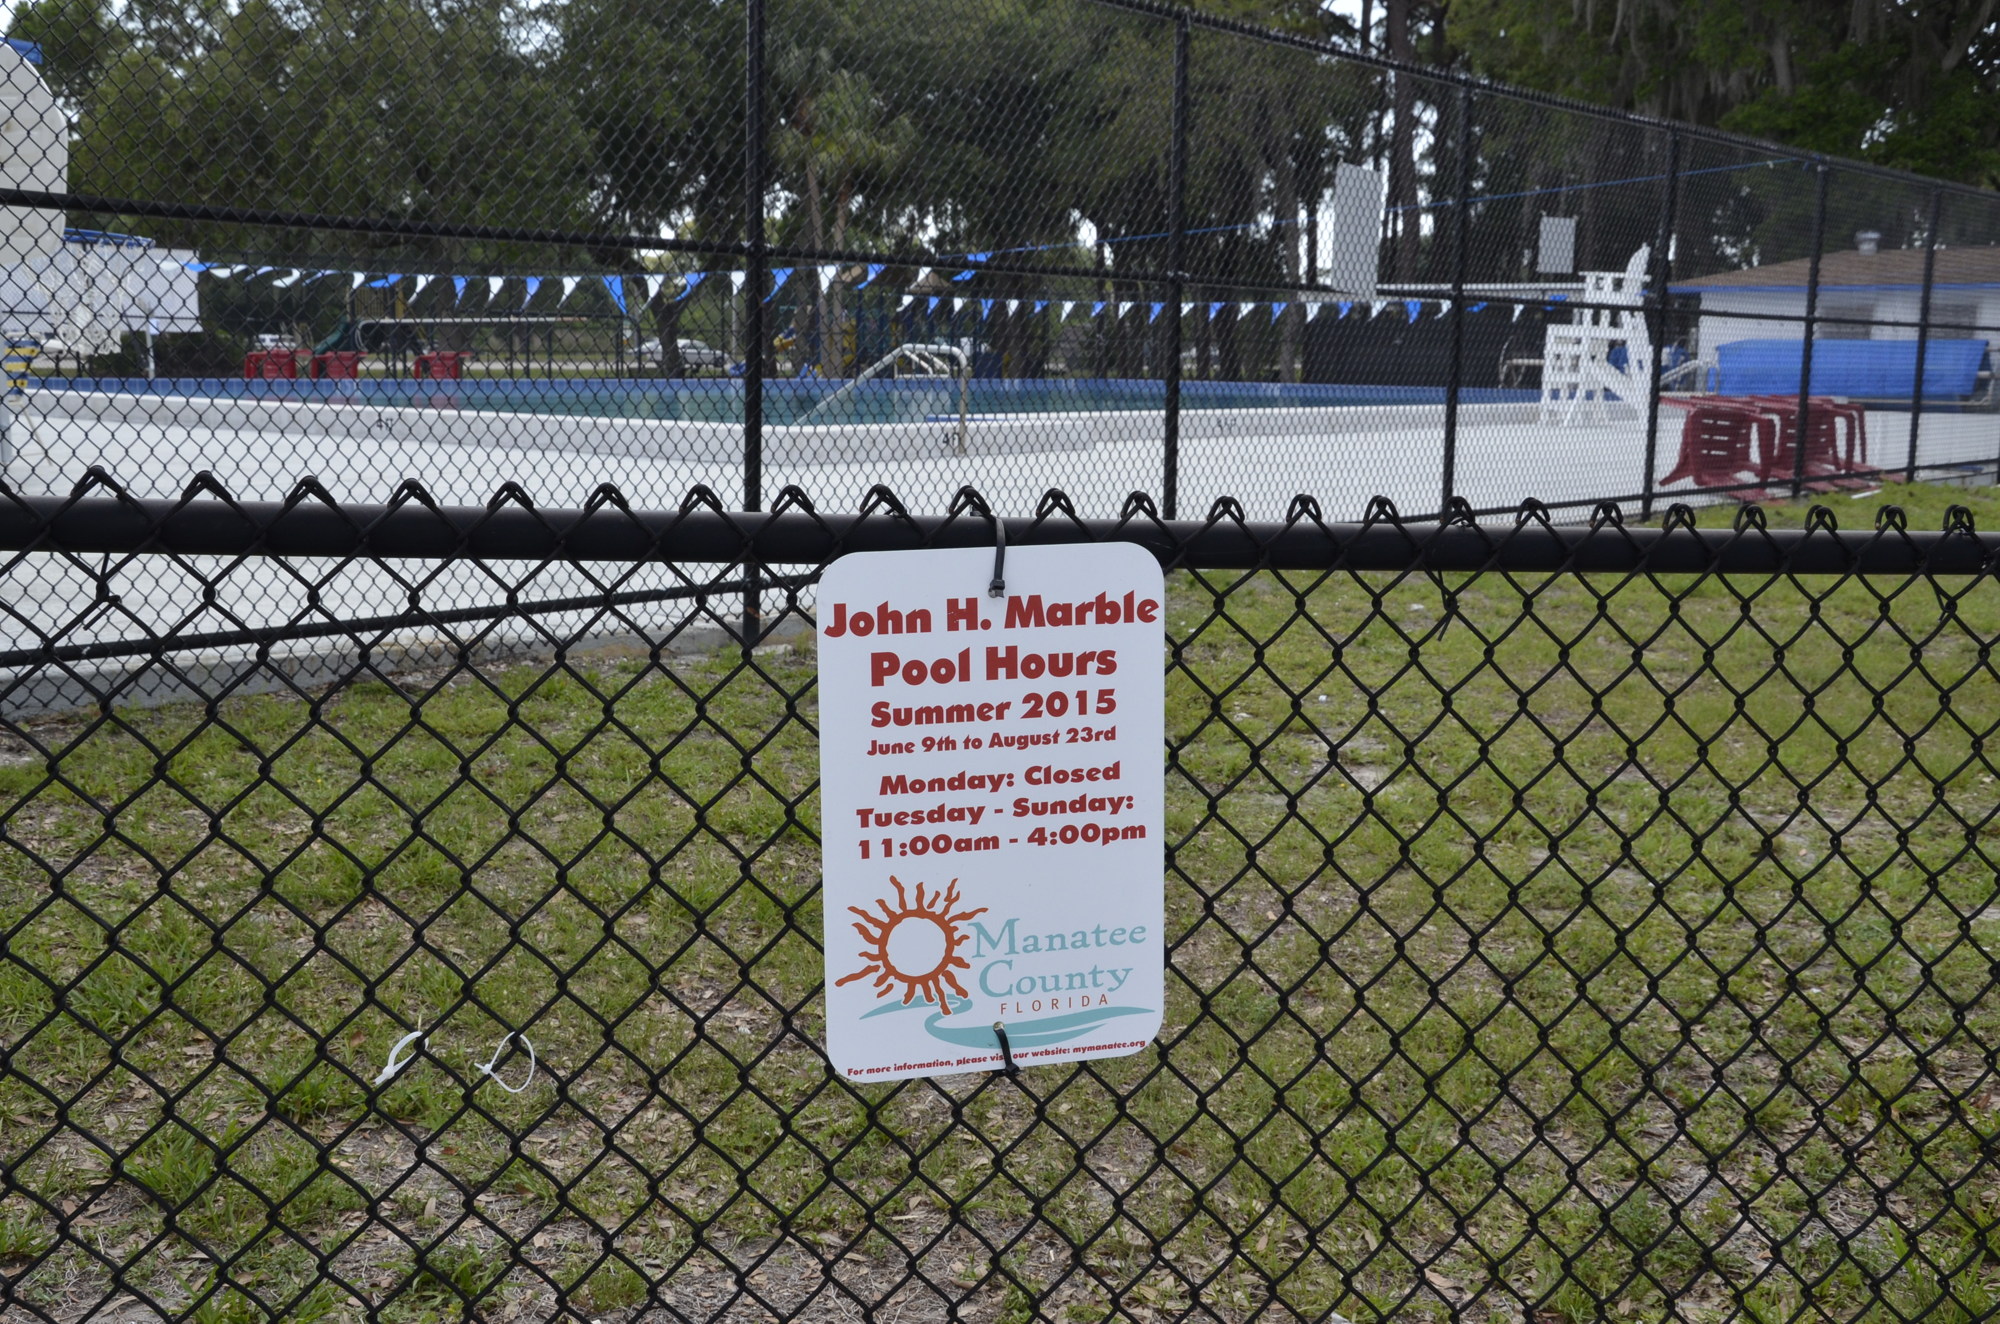 The John H. Marble pool will offer extended swimming lessons this summer, increasing to five days a week from two days in 2014.